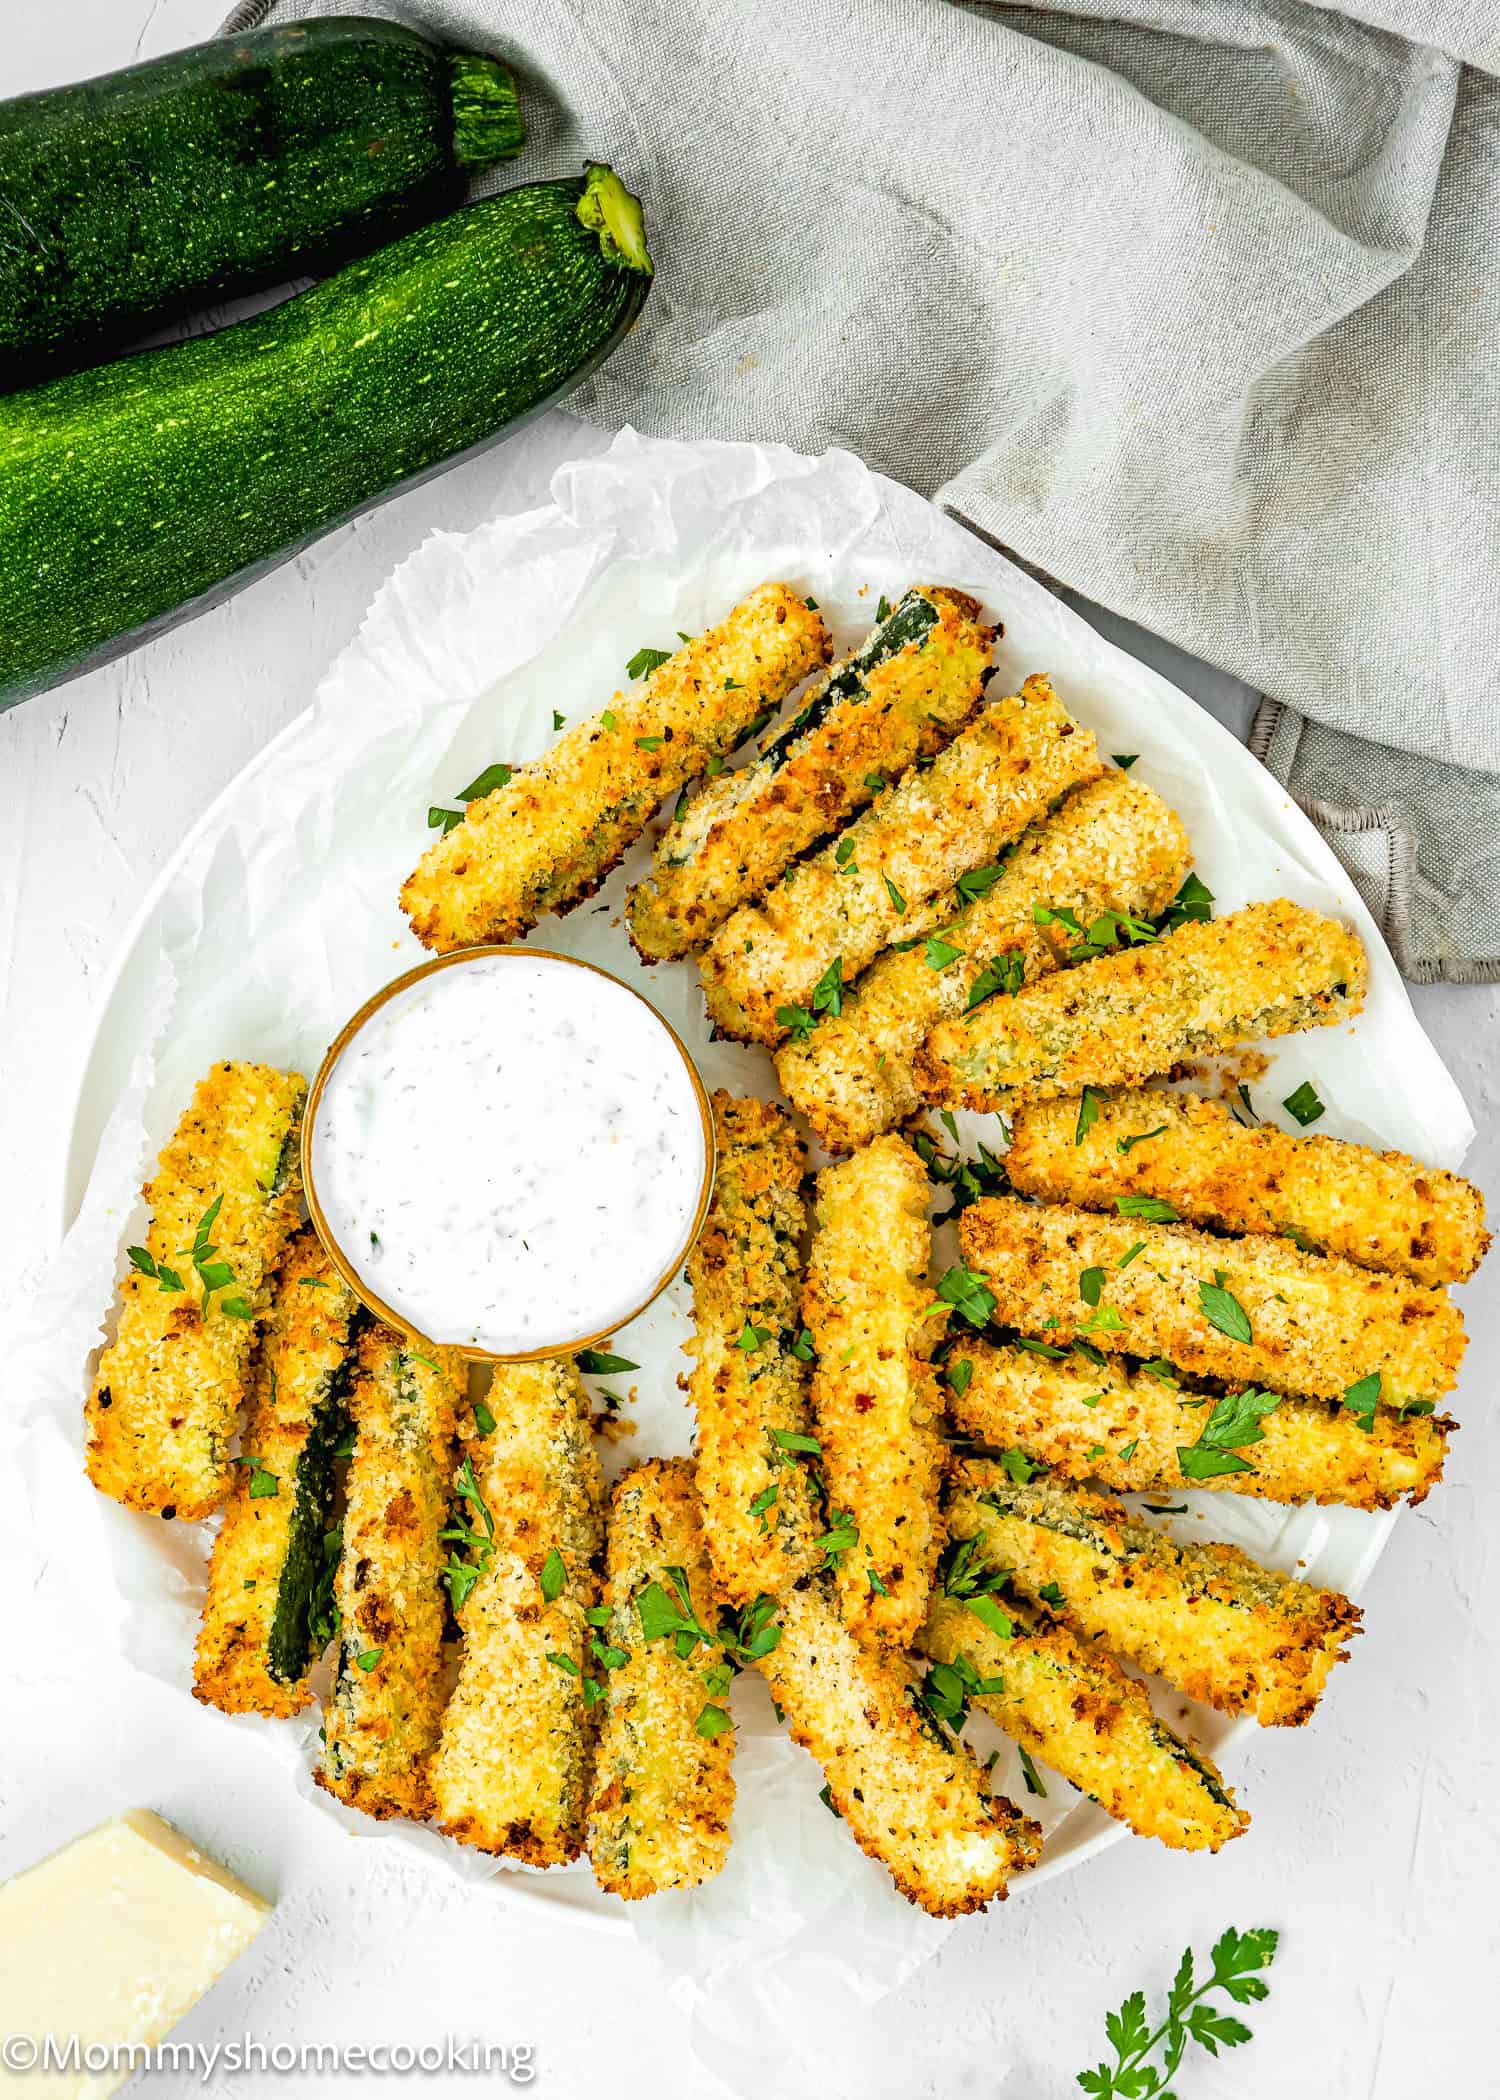 baked Eggless Zucchini Fries on a plate with Yogurt sauce and more zucchini, a kitchen towel, and a piece of Parmesan cheese around it.